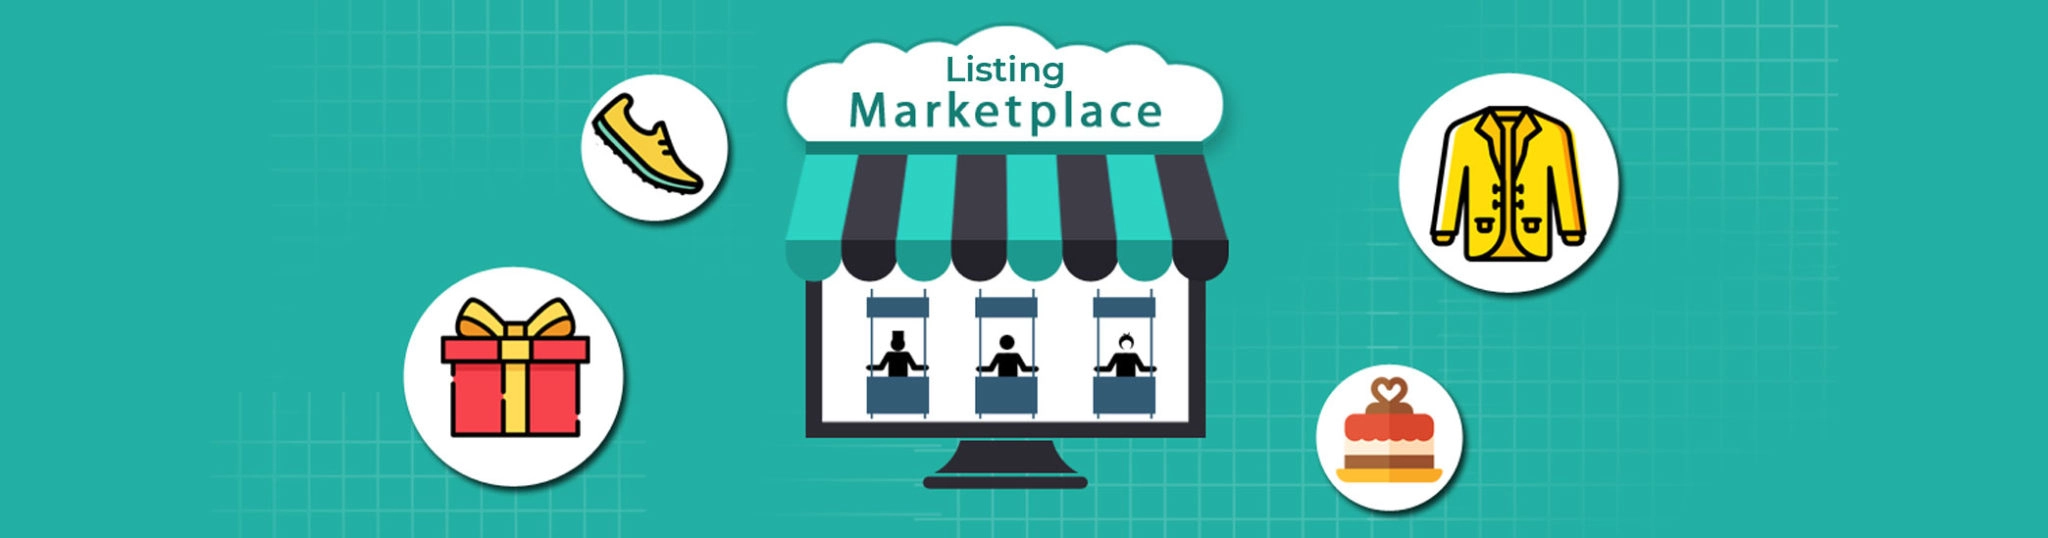 Marketplace Listing Services